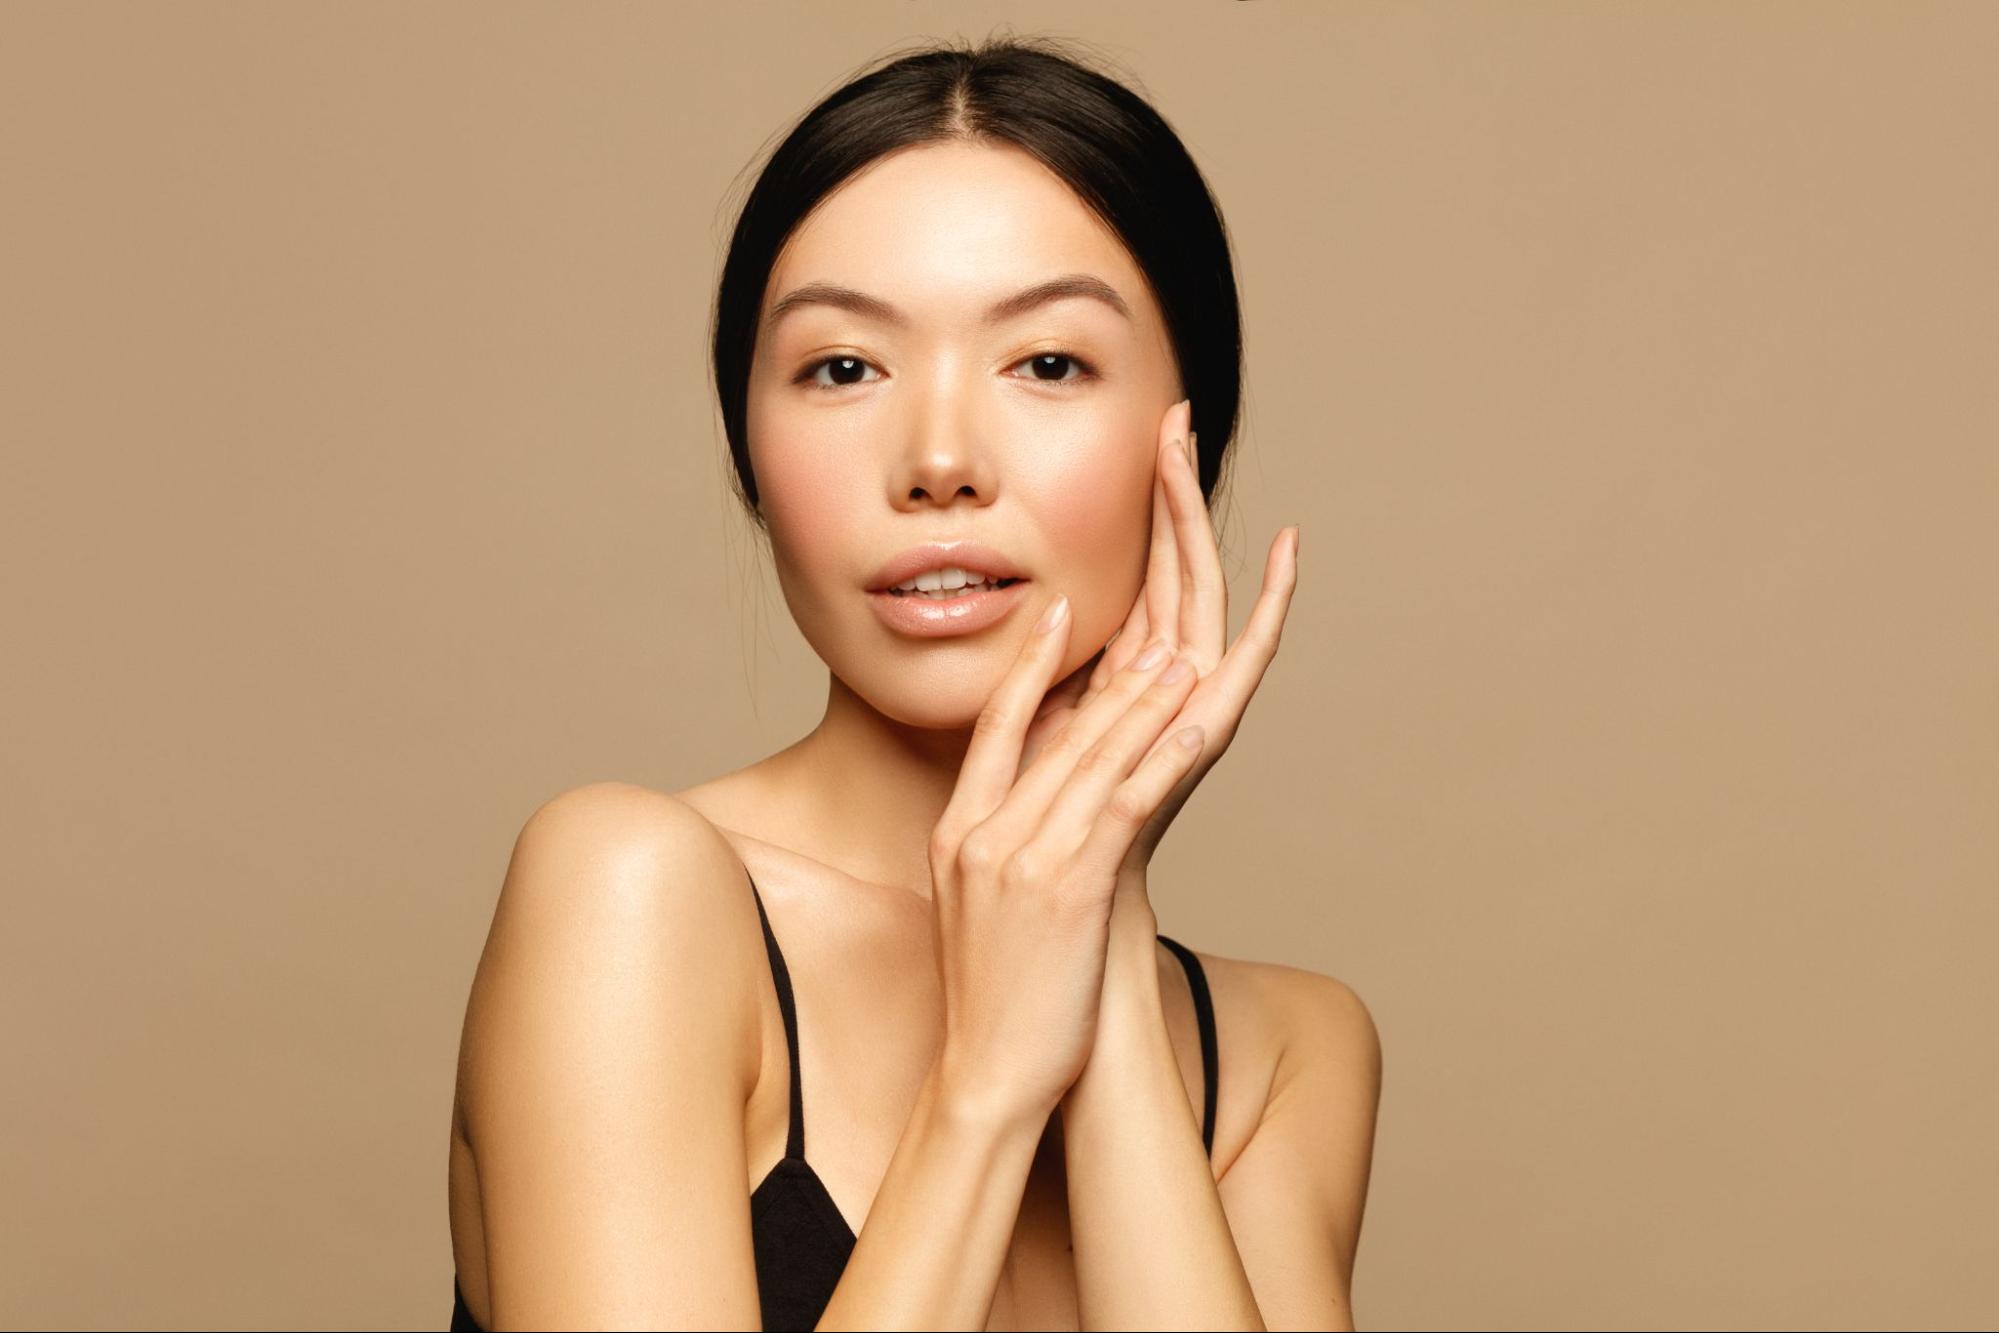 A woman with smooth, flawless skin to represent how to maintain a youthful glow